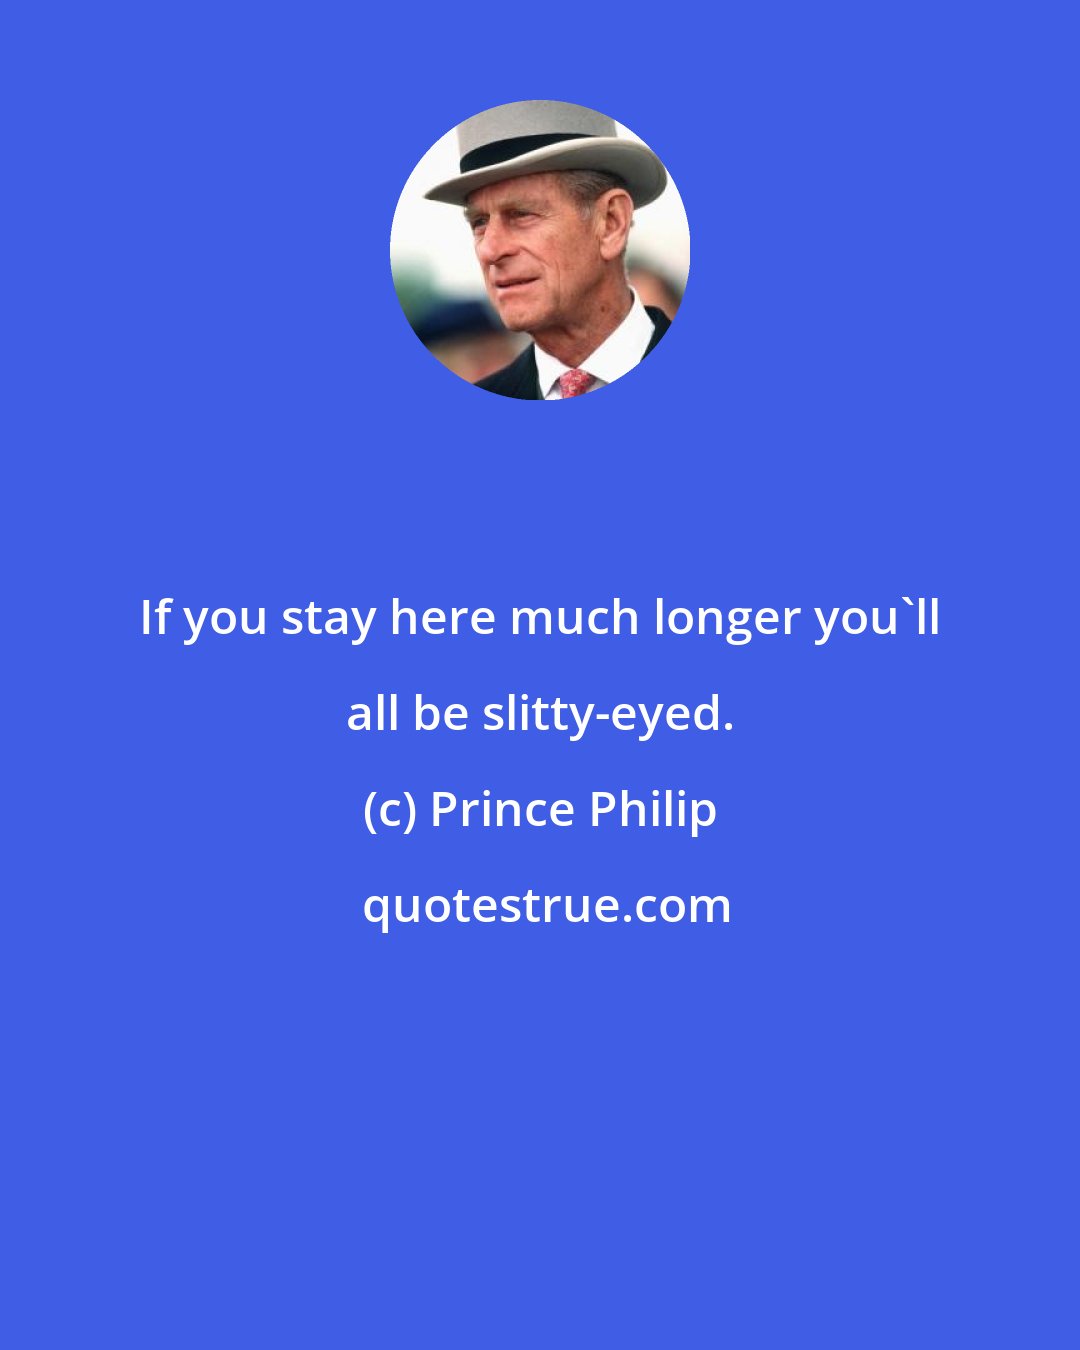 Prince Philip: If you stay here much longer you'll all be slitty-eyed.